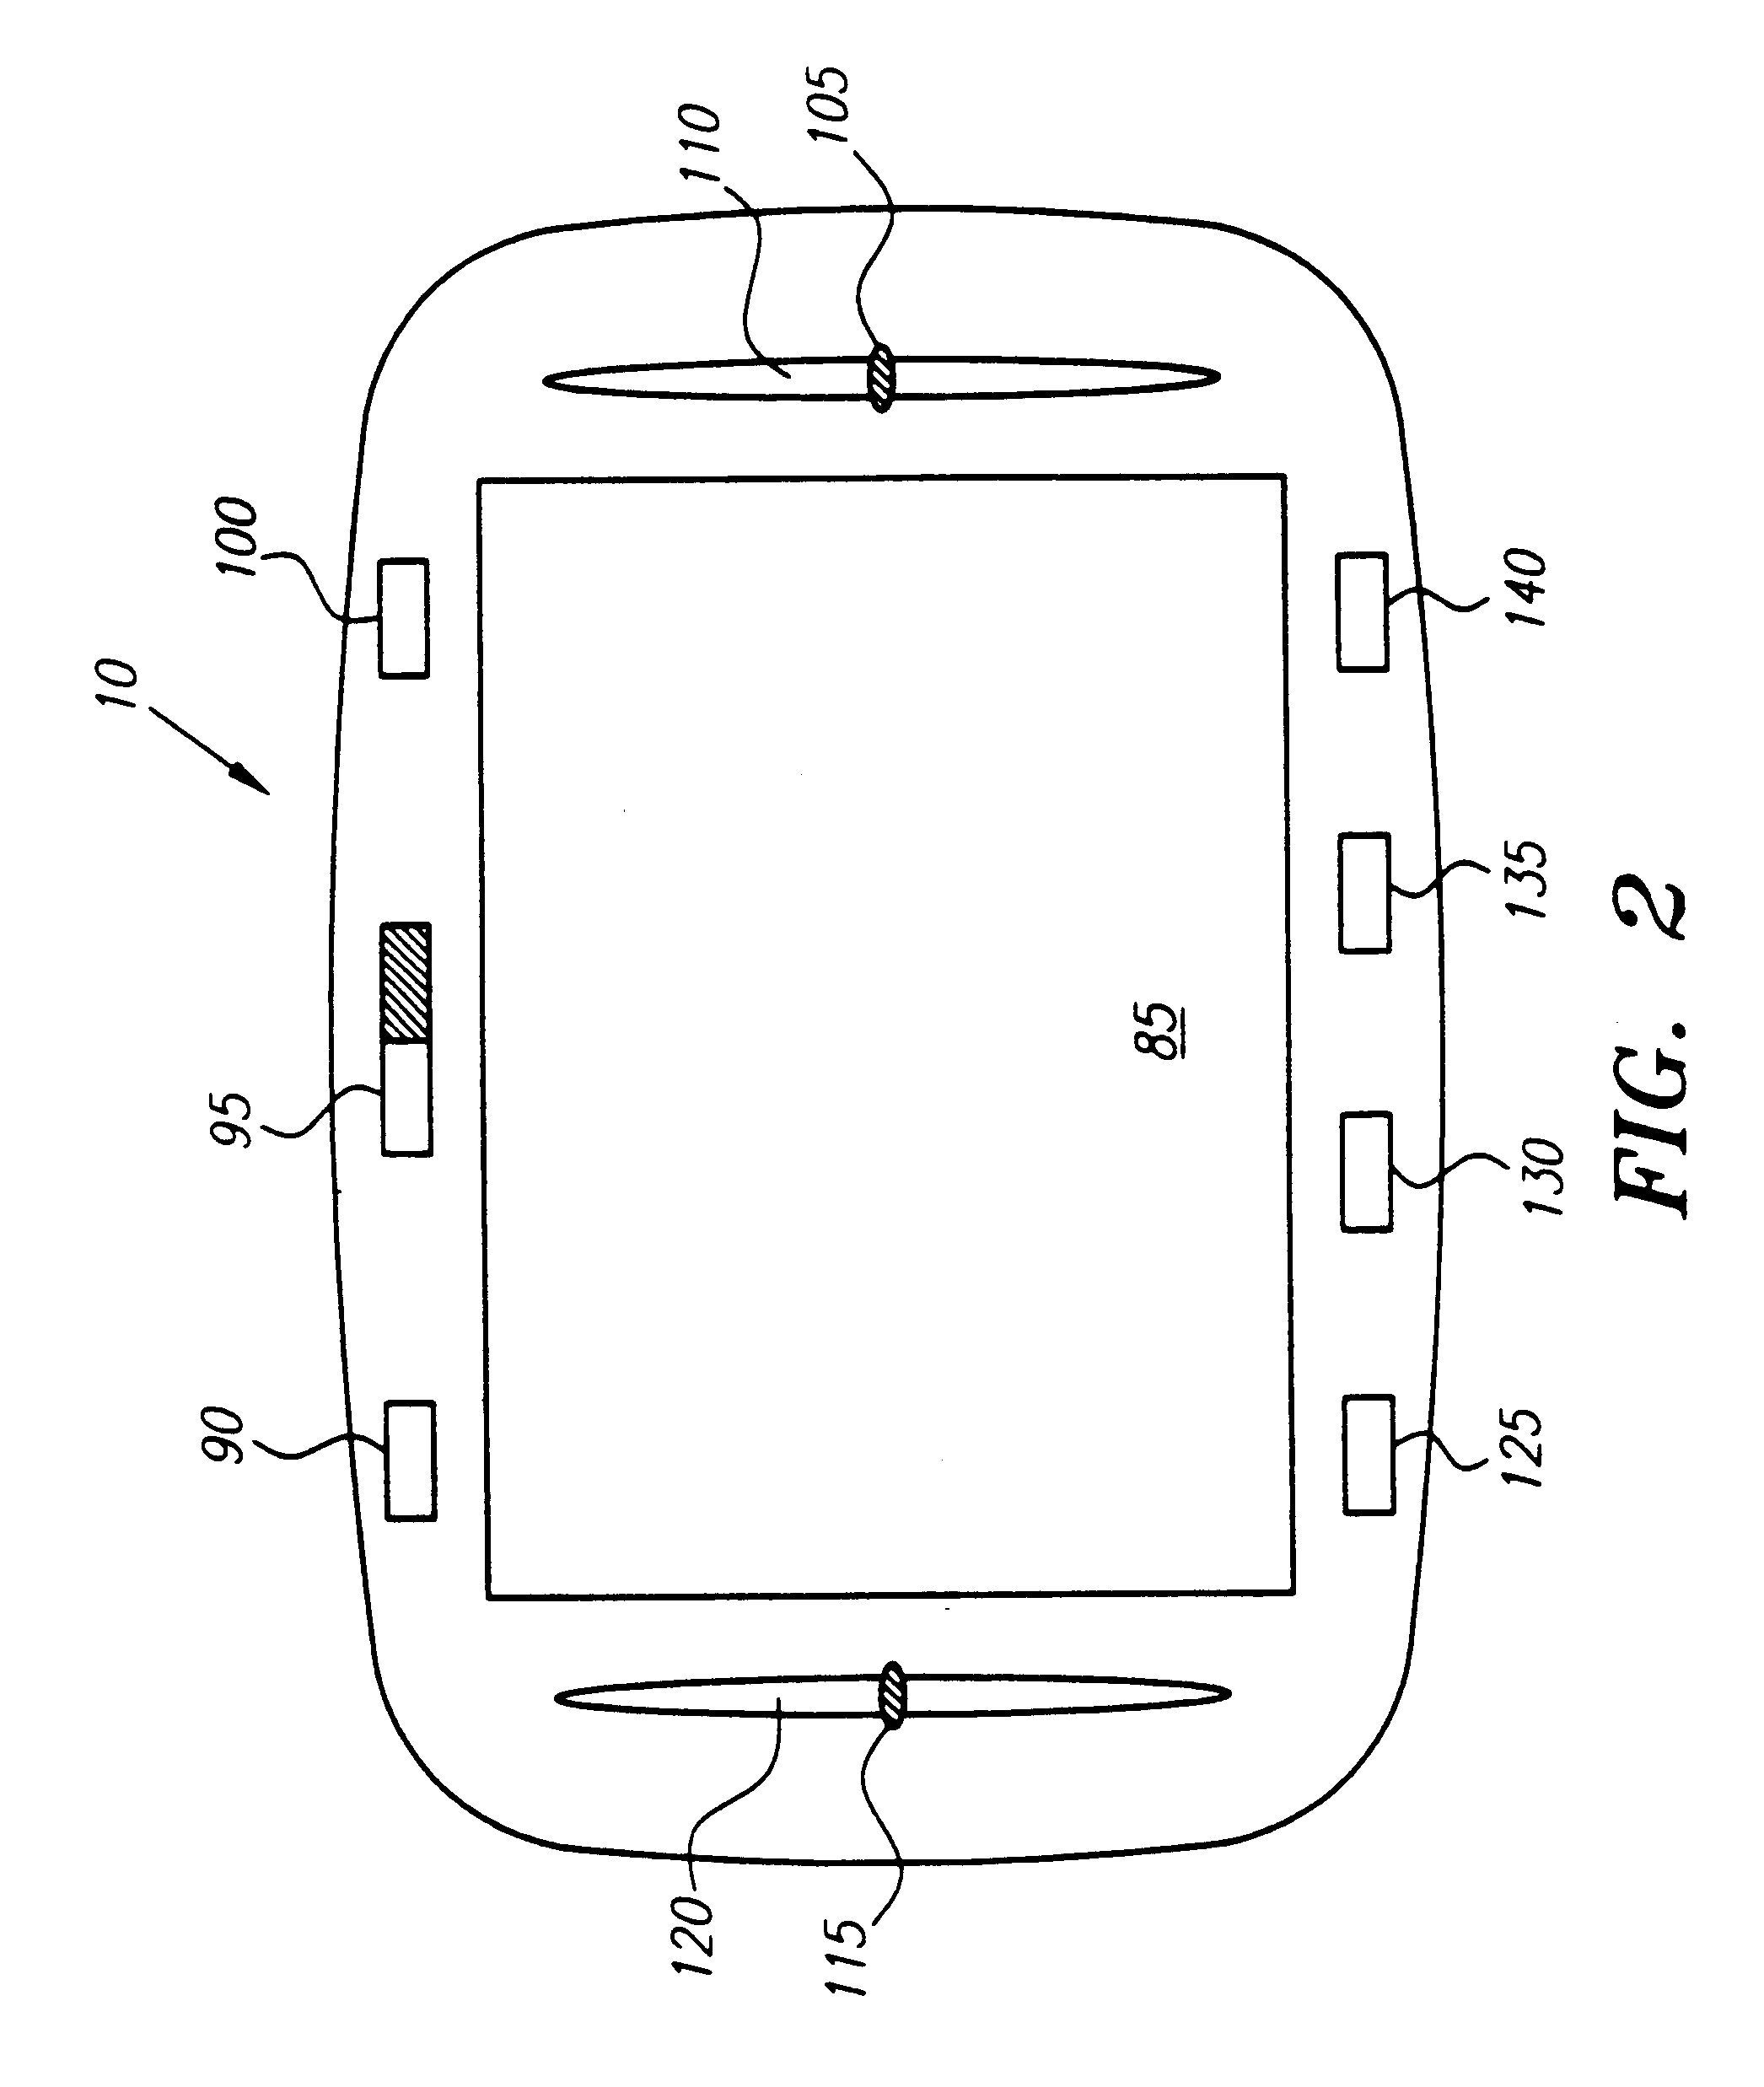 Portable internet-enabled controller and information browser for consumer devices